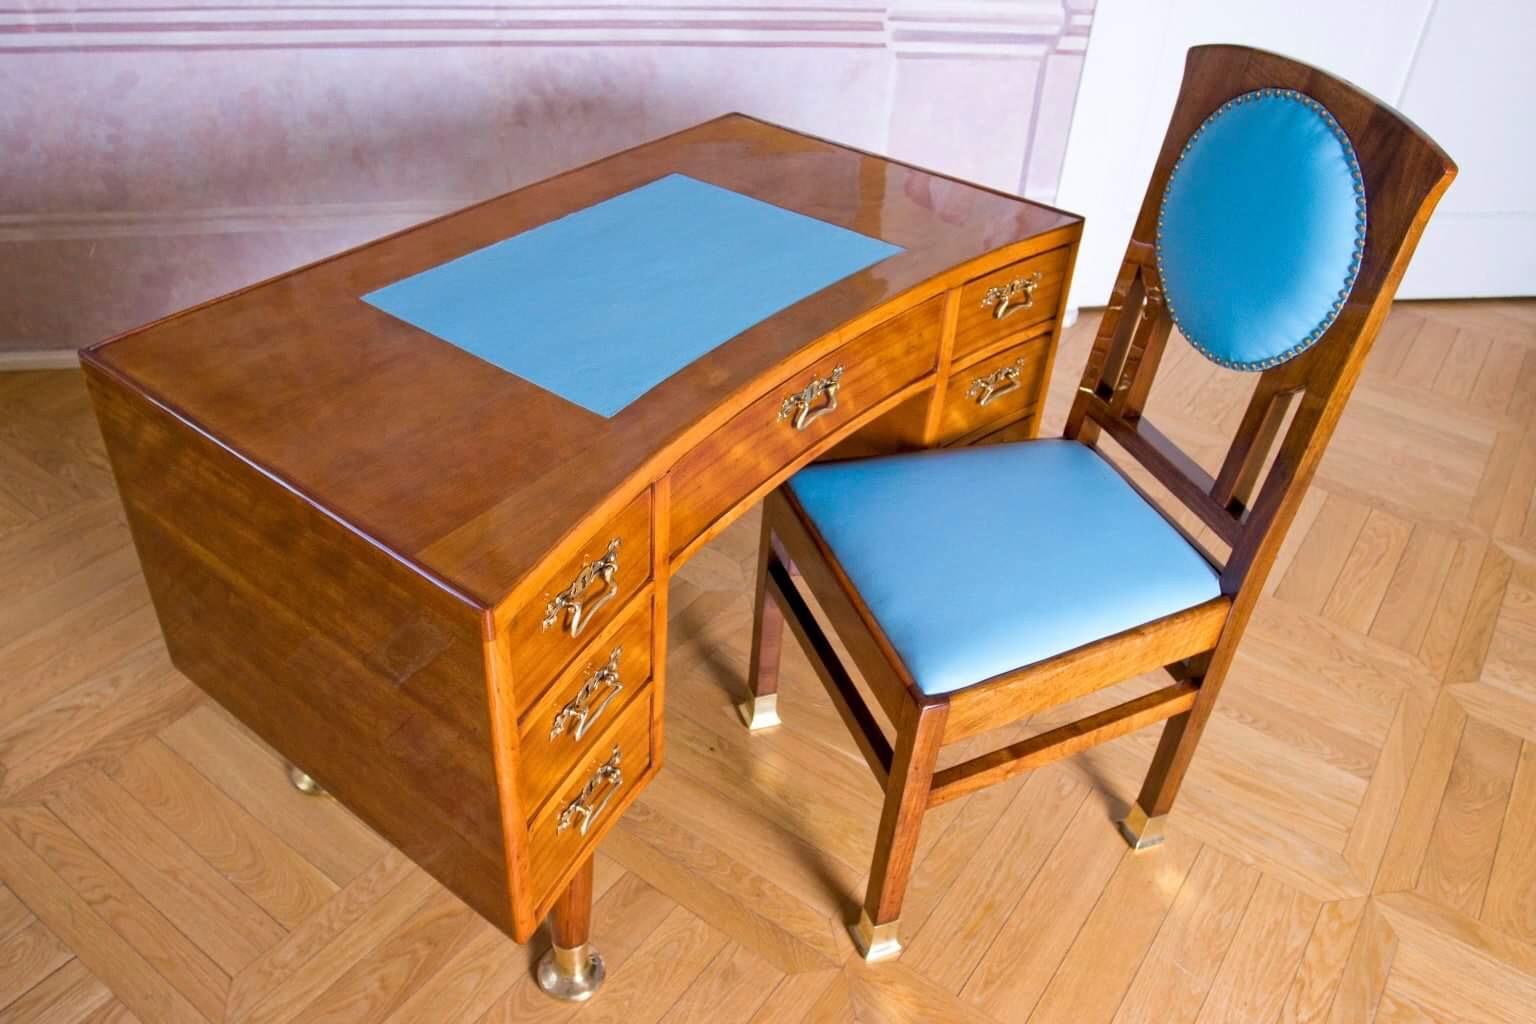 20th Century Women's Desk Hungarian Secession In Good Condition For Sale In Gyermely, Komárom-Esztergom